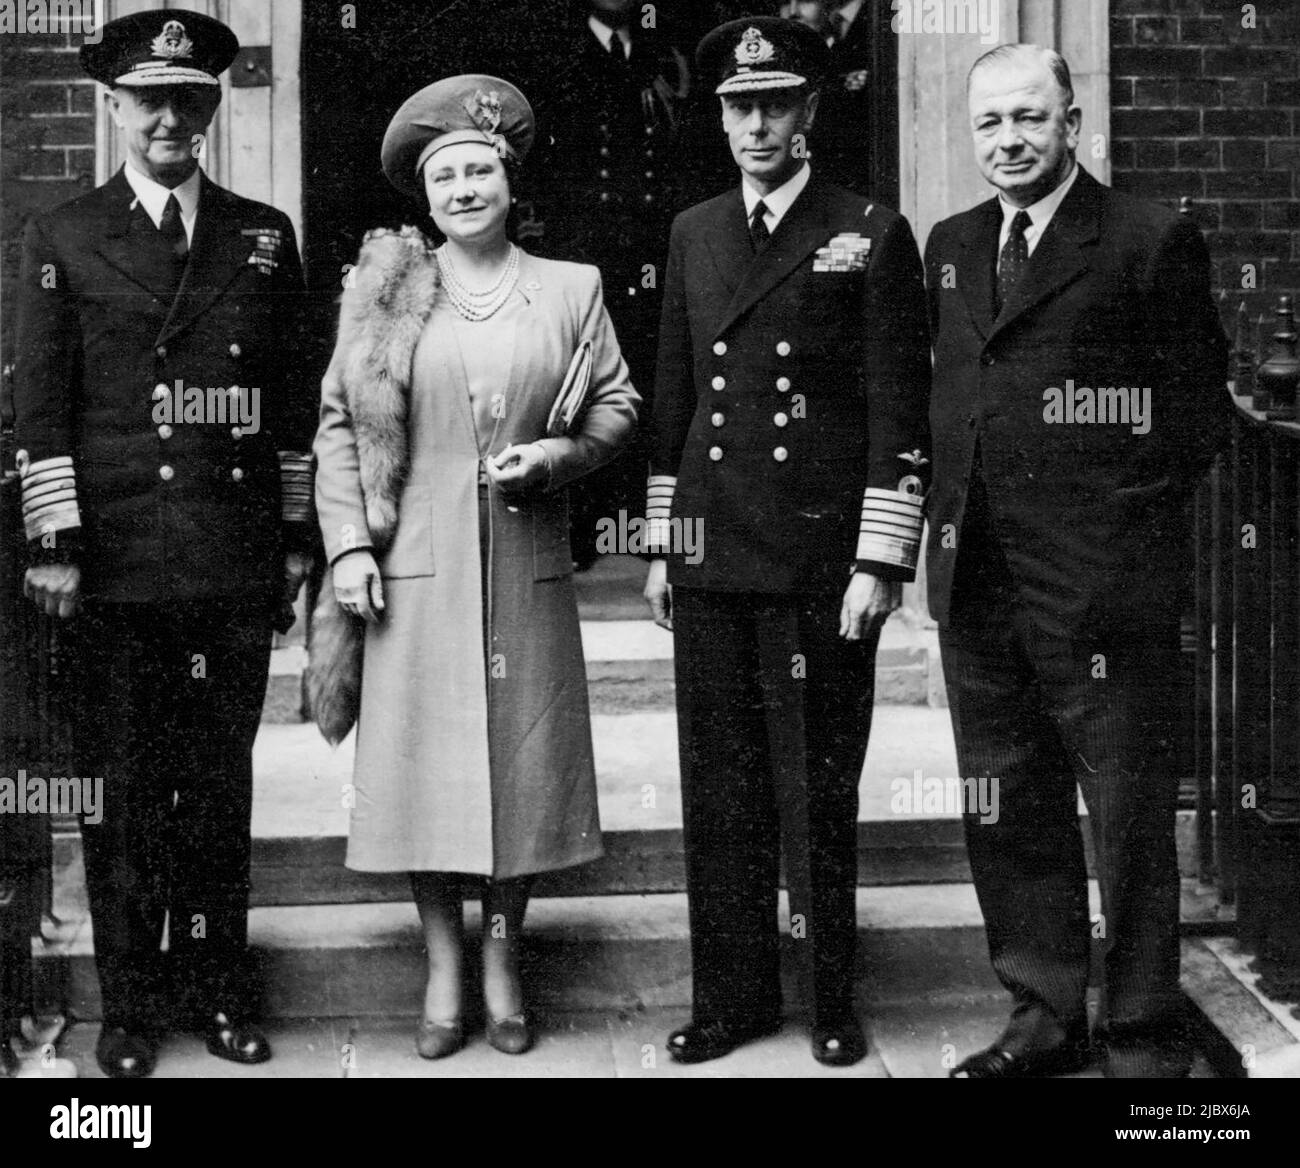 The King and Queen At The Admiralty - (left to right) Admiral of the fleet Sir Andrew Cunningham, first Sea Lord, T.M. The Andrew & The King, & Mr A.V. Alexander, (first Lord of the admirably) pose for a photograph at the end of the visit. The visit of the King and Queen to the admiralty. April 05, 1944. Stock Photo